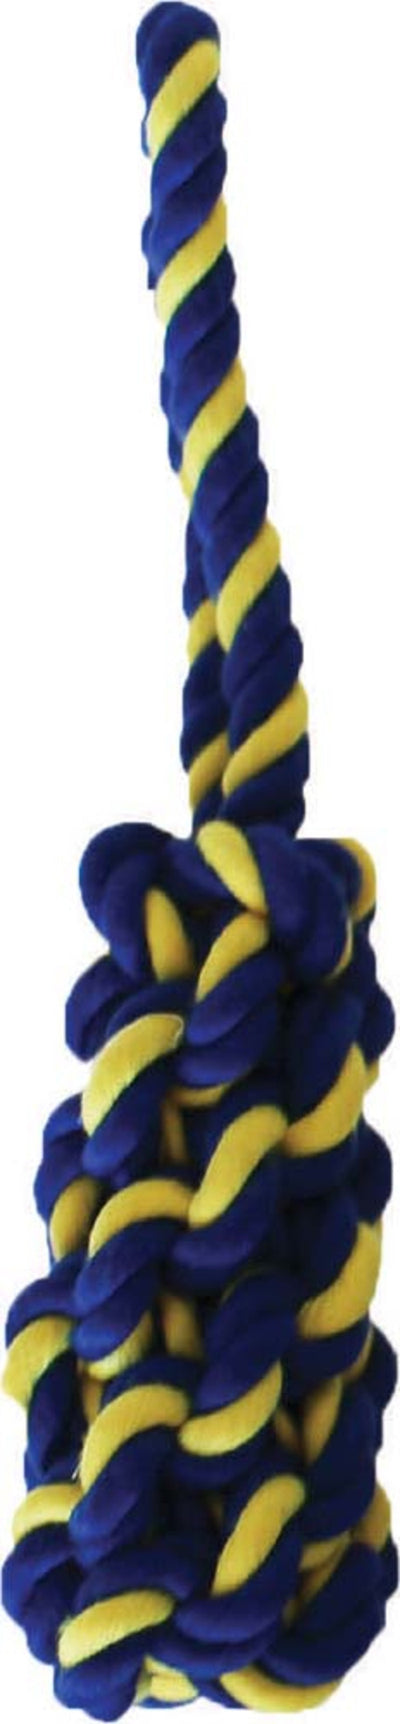 Petsport USA Twisted Chew Bumper Dog Toy Blue; Yellow 7 in Mini